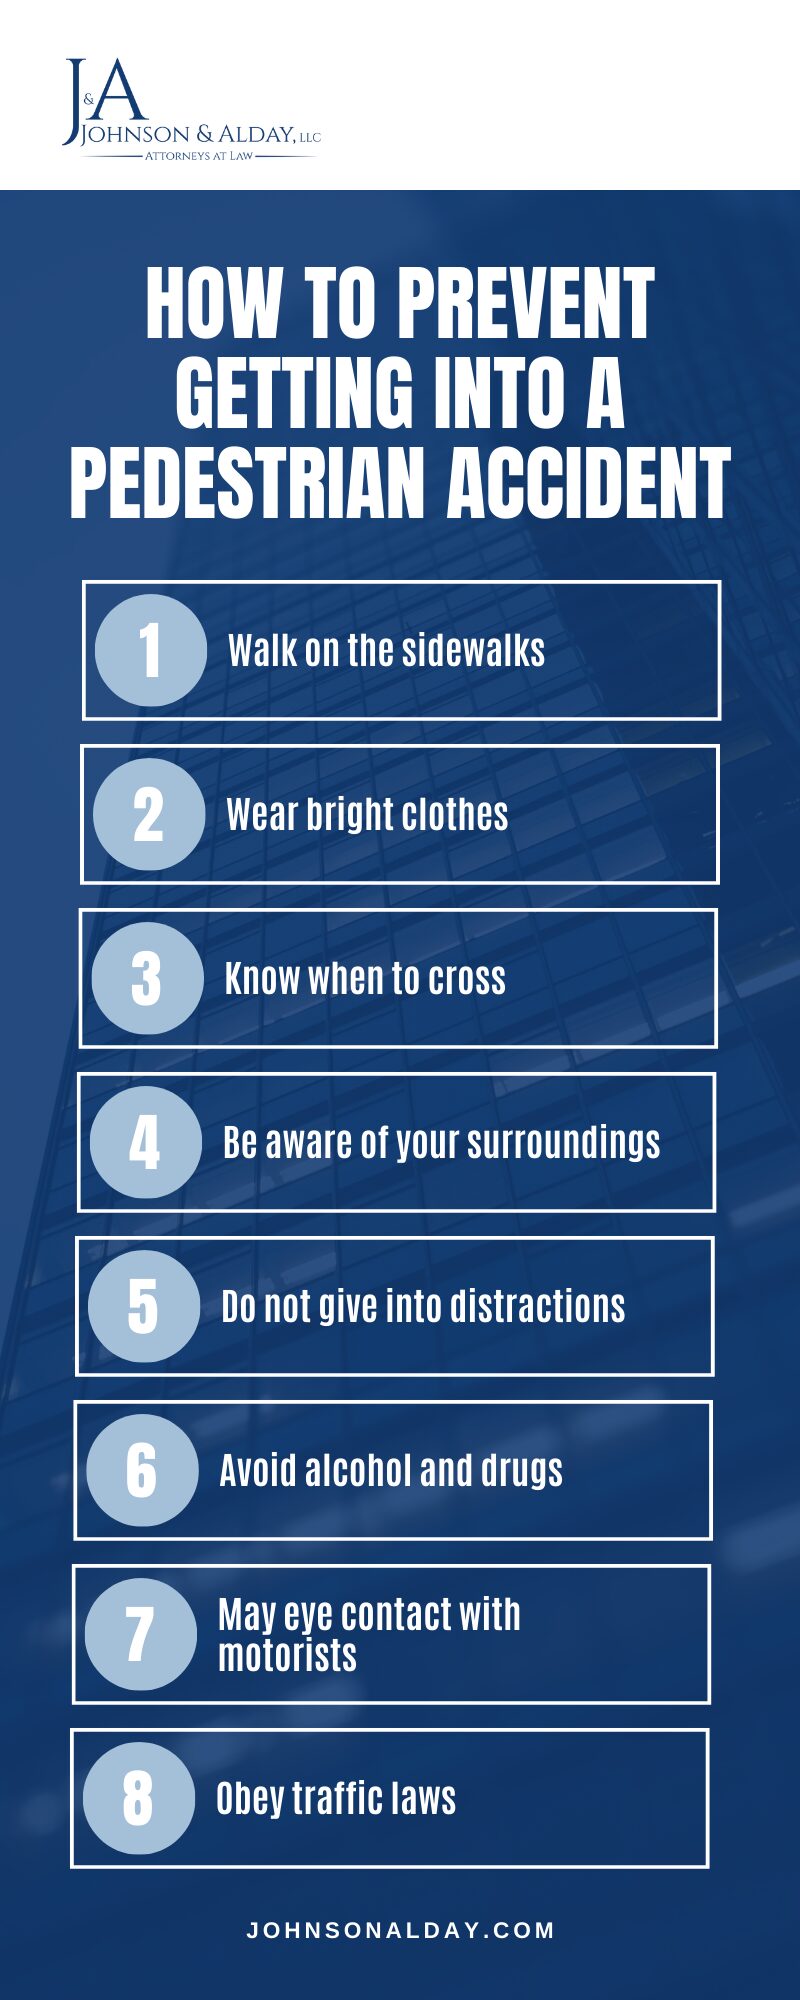 How To Prevent Getting Into A Pedestrian Accident Infographic